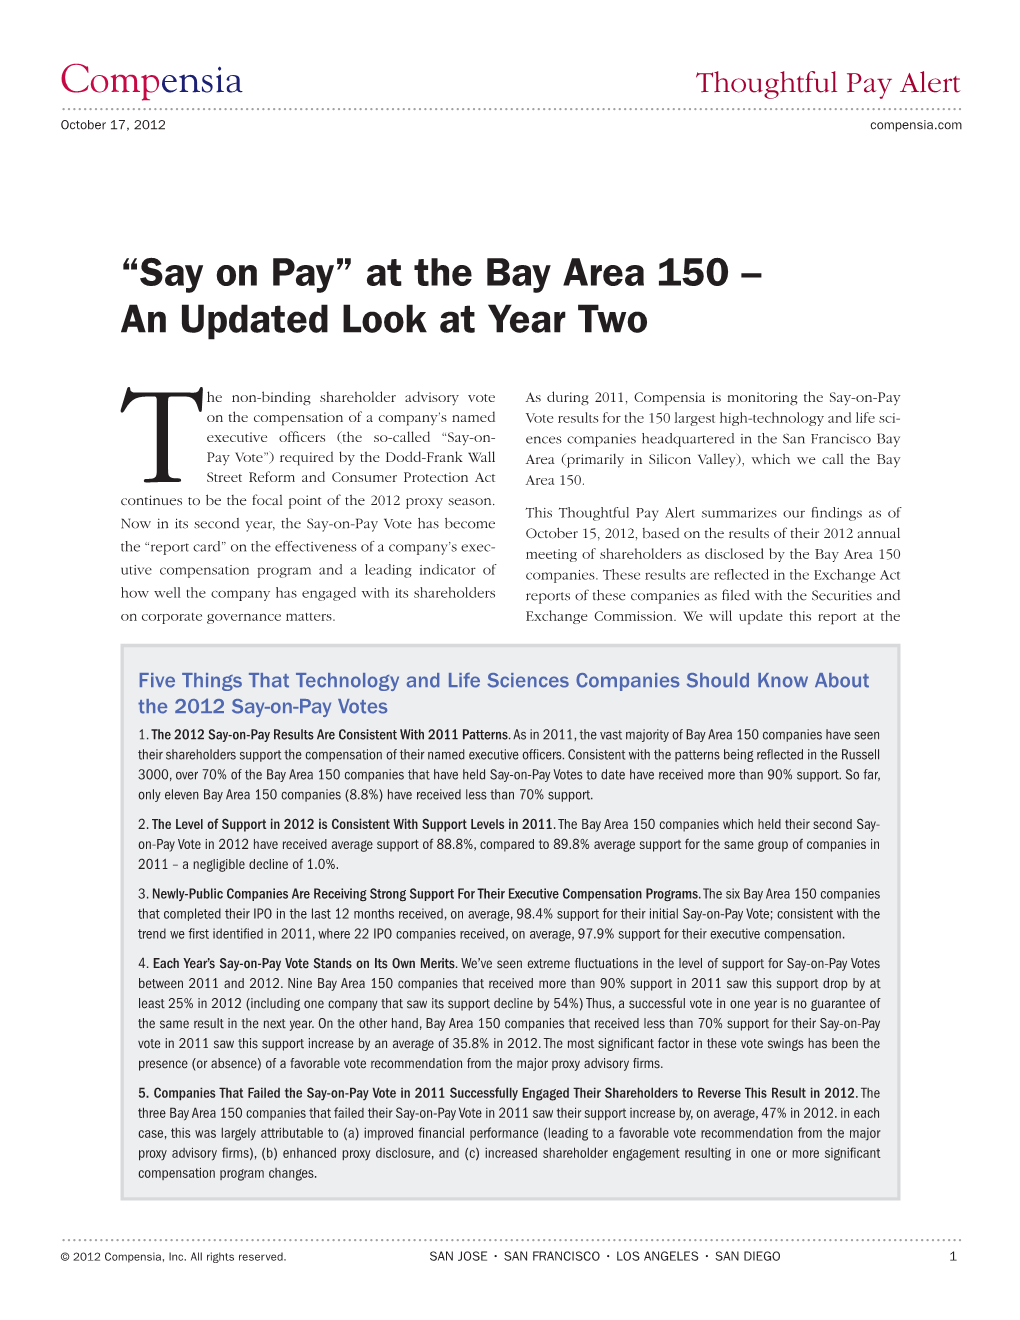 Compensia “Say on Pay” at the Bay Area 150 – an Updated Look At